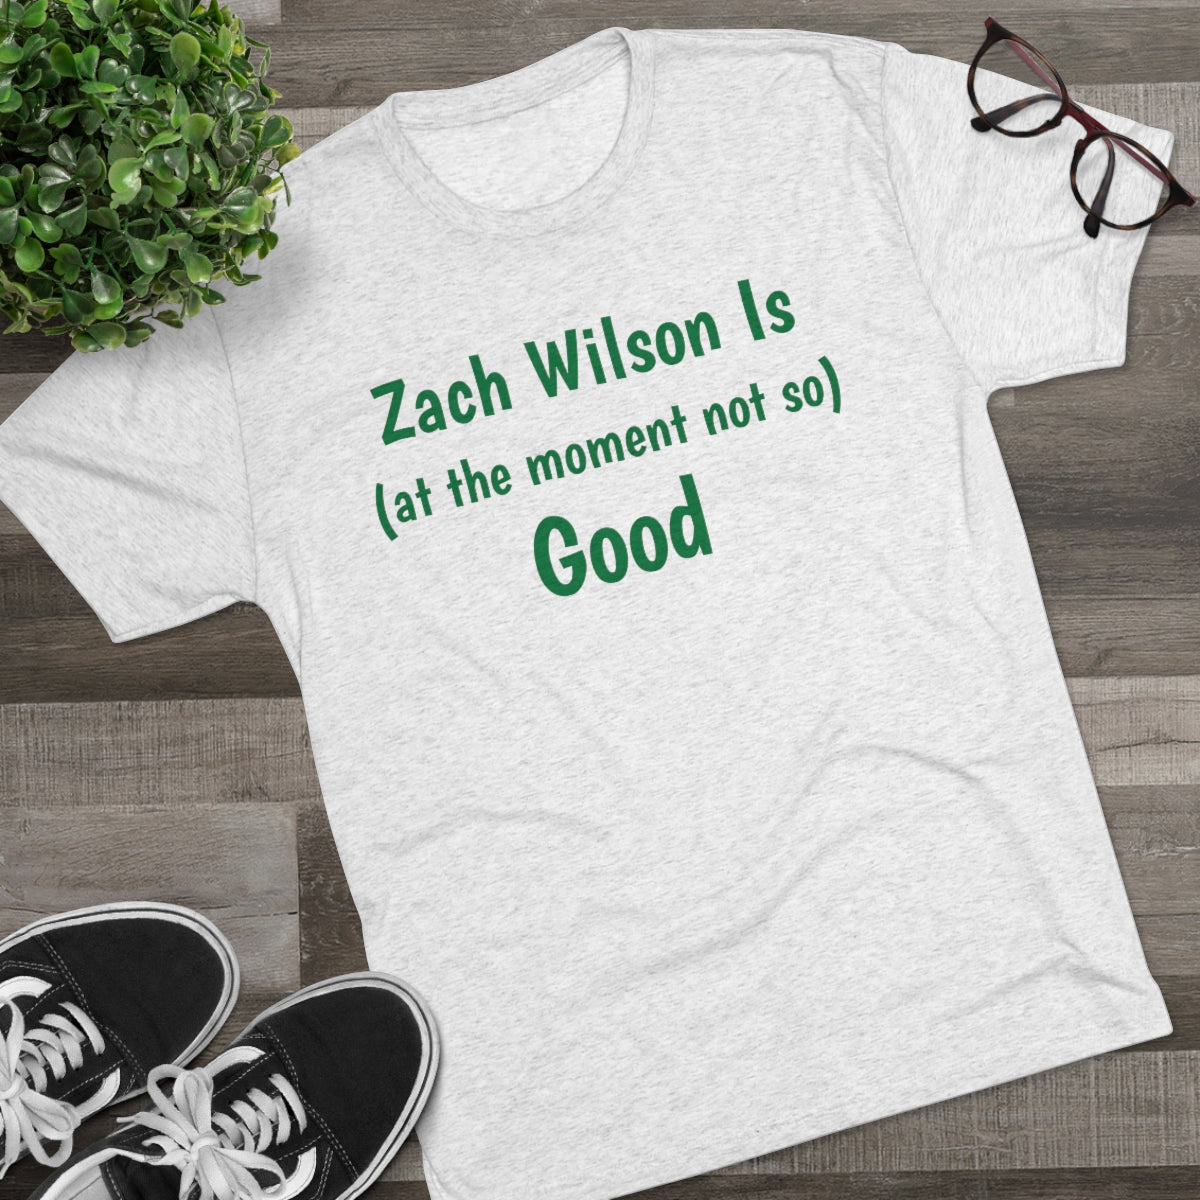 Zach Wilson Is (at the moment not so) Good Shirt - IsGoodBrand